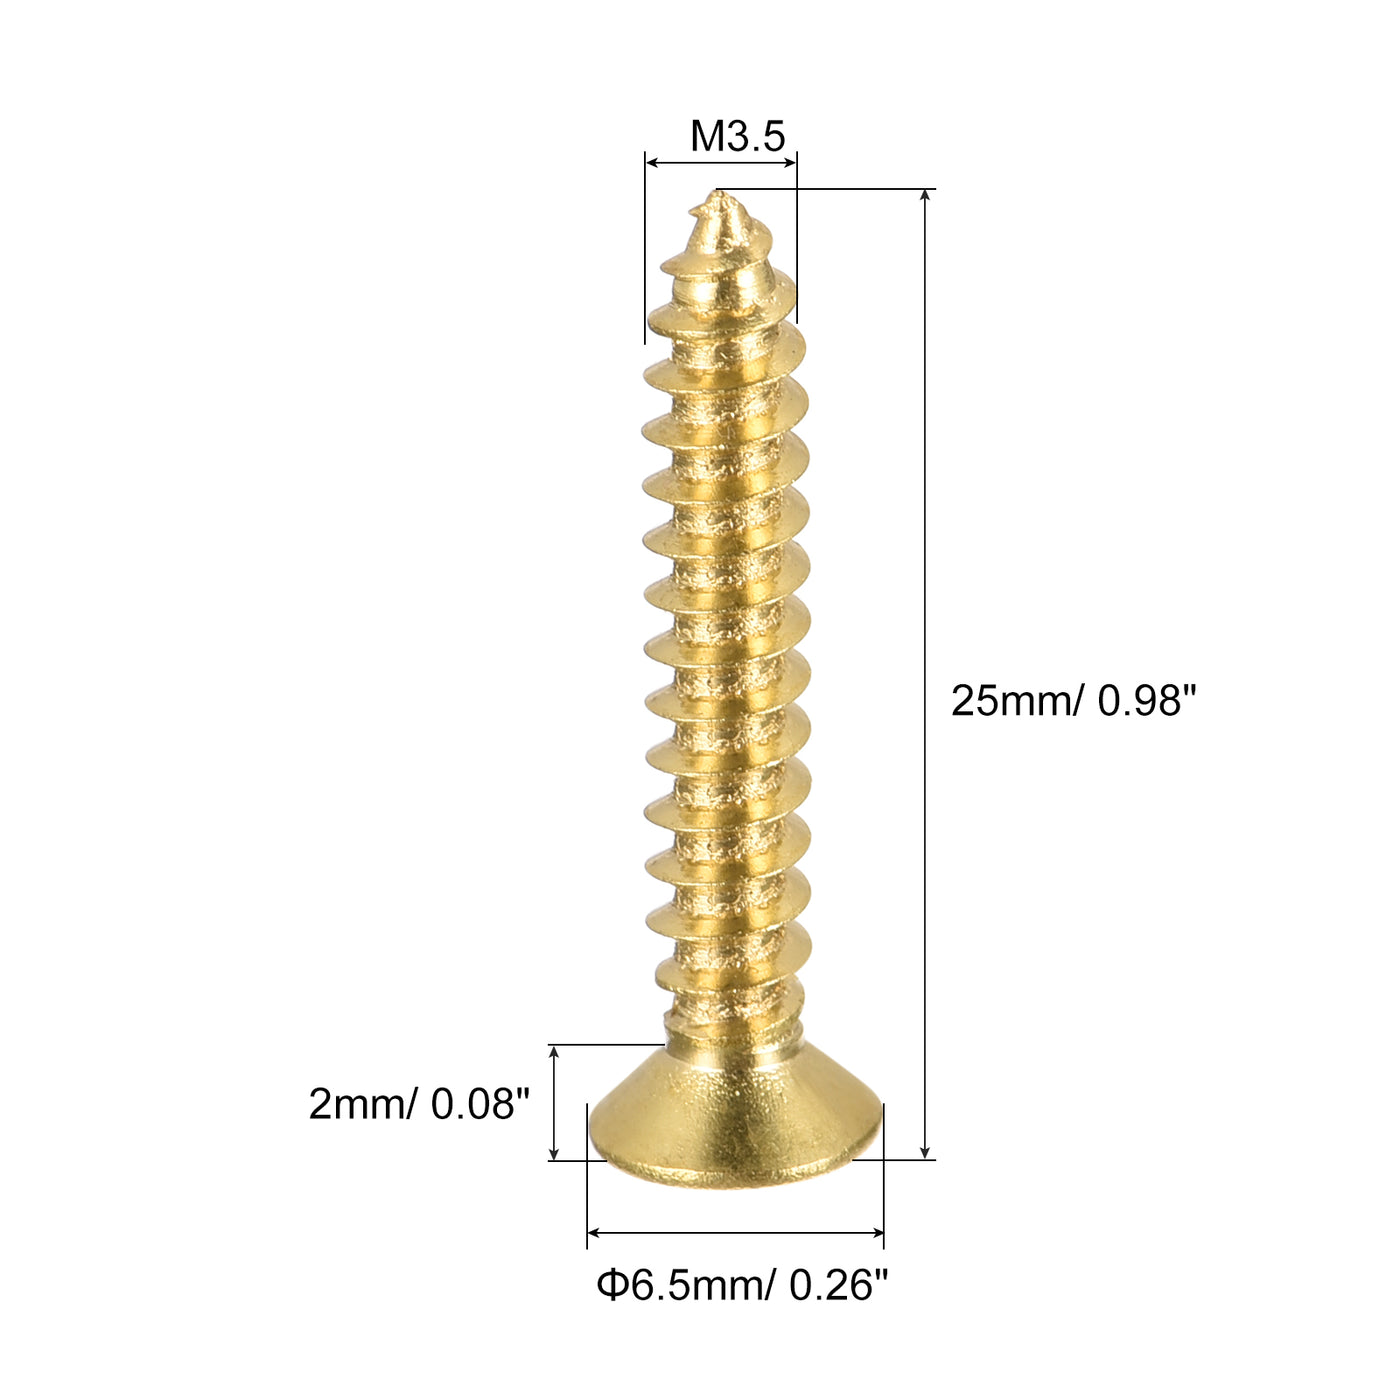 uxcell Uxcell Brass Wood Screws, M3.5x25mm Phillips Flat Head Self Tapping Connector for Door, Cabinet, Wooden Furniture 25Pcs